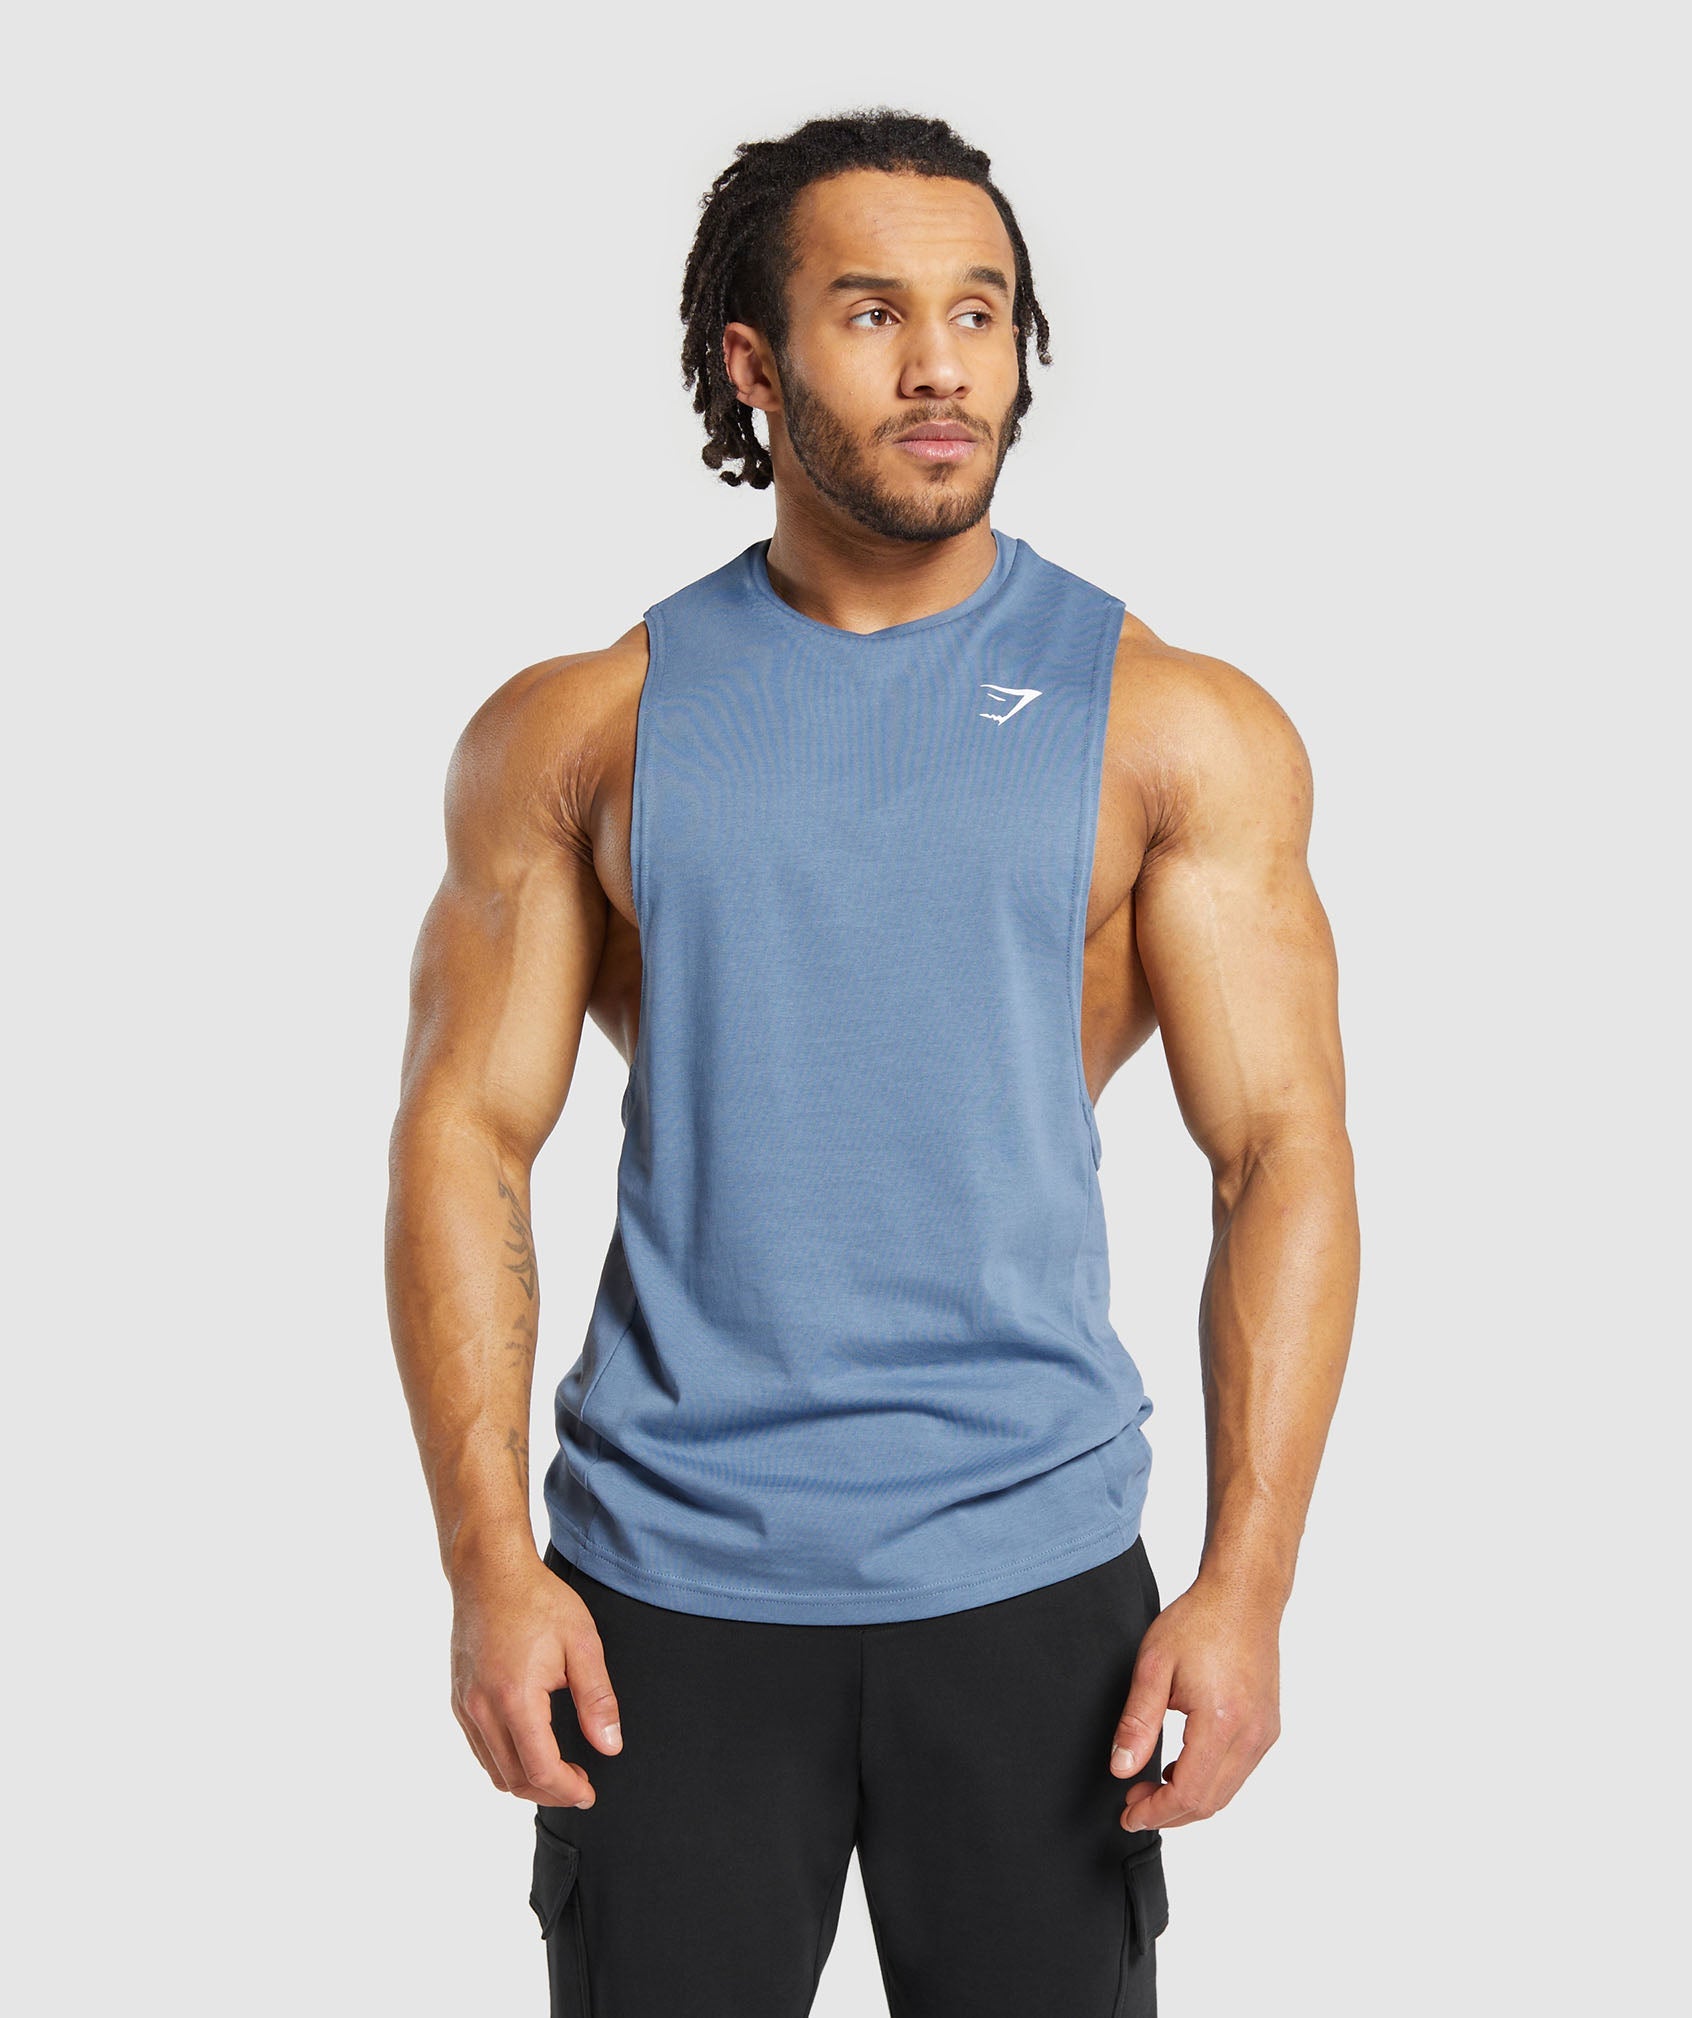 React Drop Arm Tank in Faded Blue is out of stock